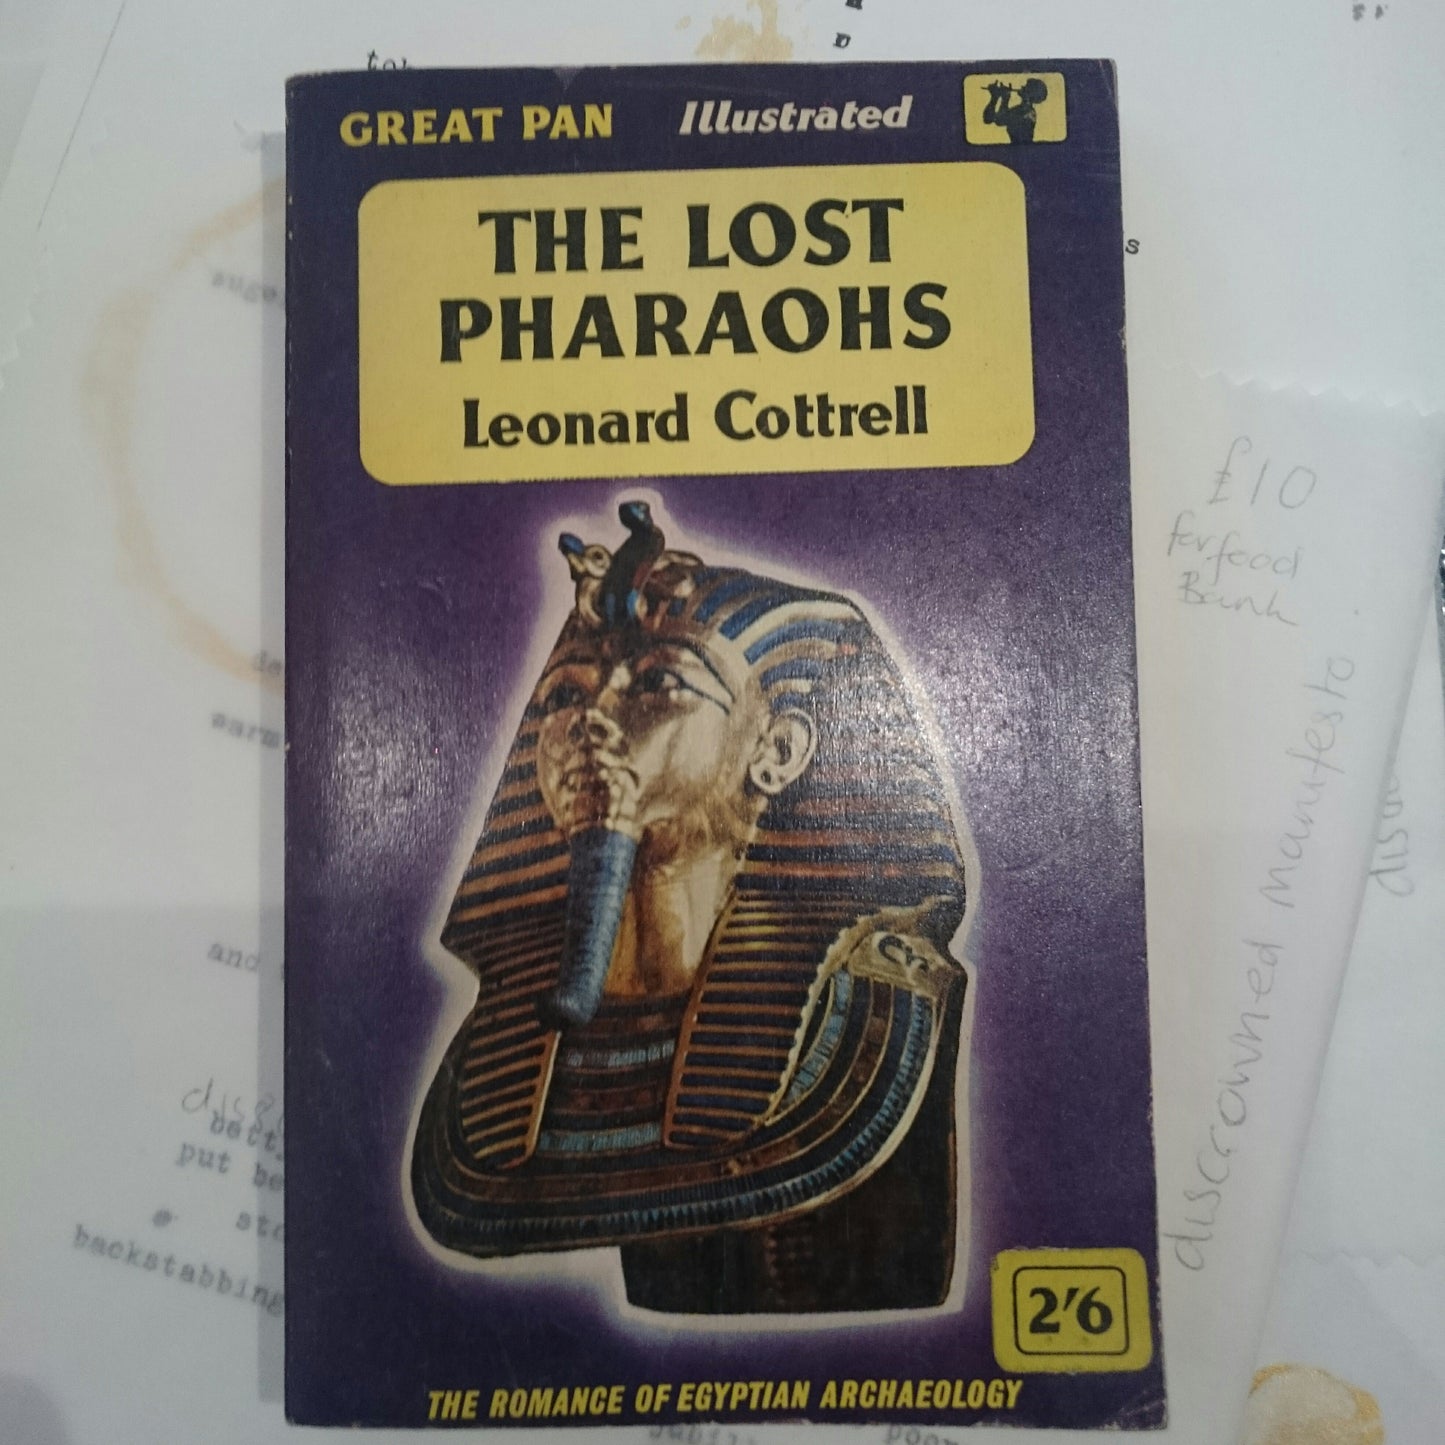 The Lost Pharaohs